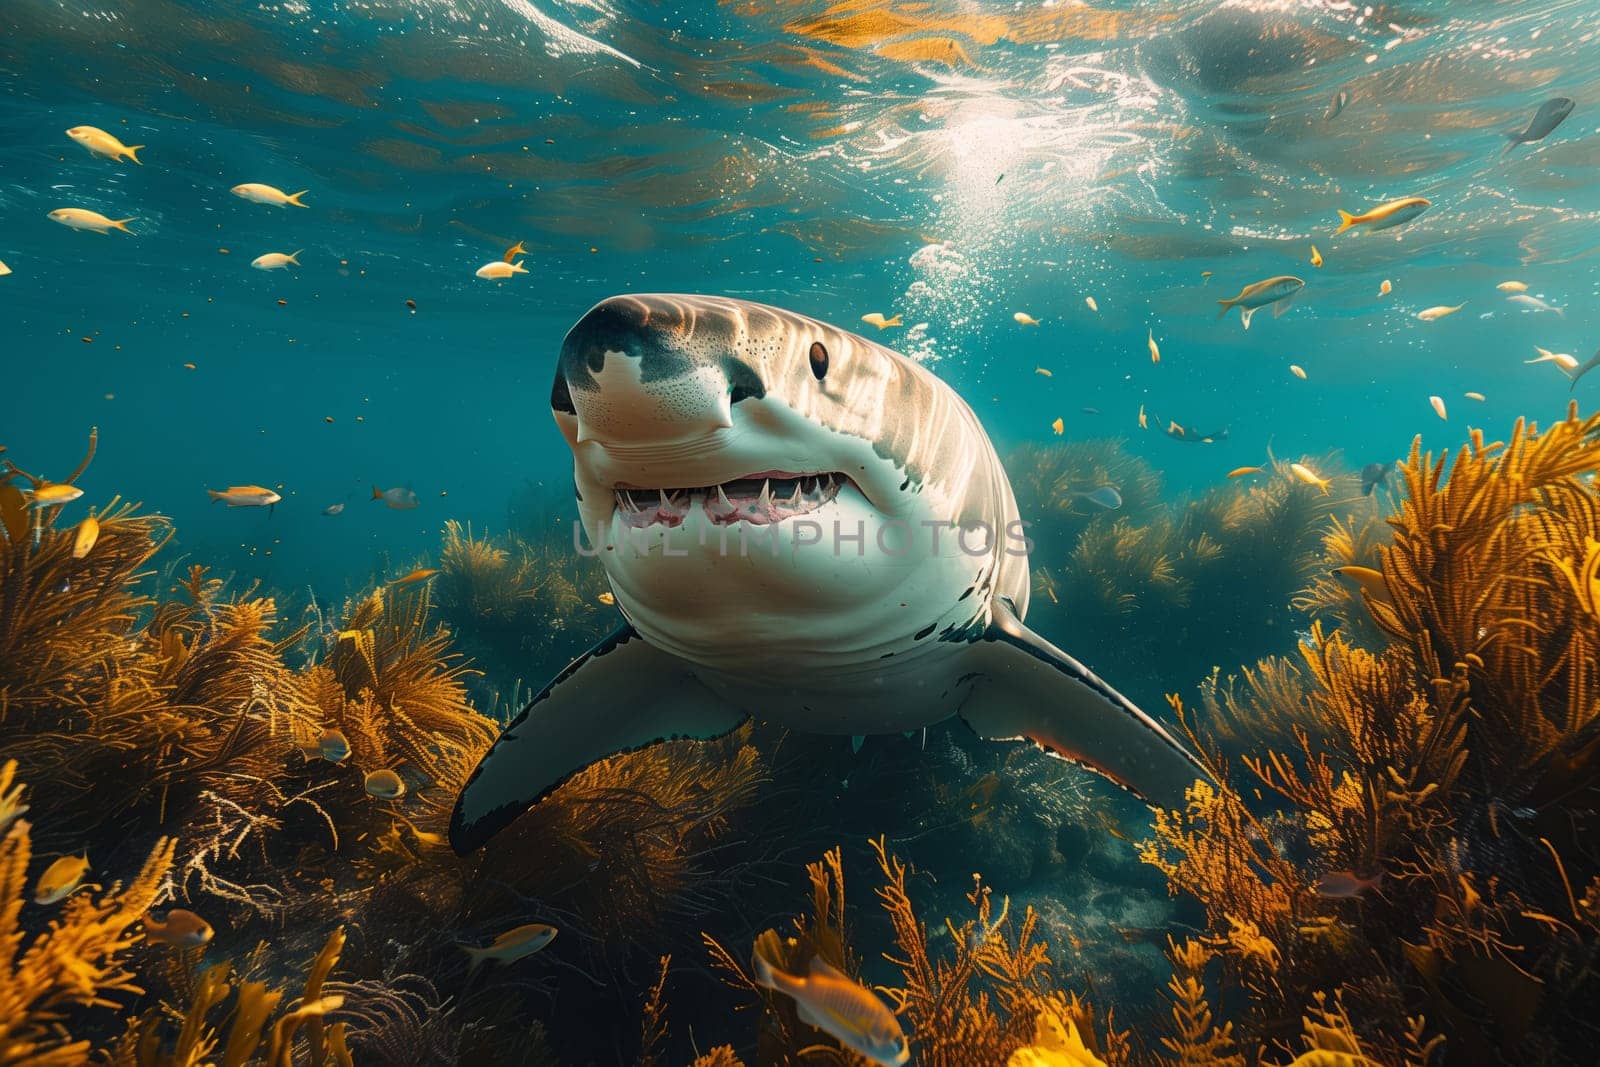 A great white shark, a member of the Lamnidae family, swims underwater in the ocean near seaweed. This apex predator is a fascinating marine organism studied in marine biology